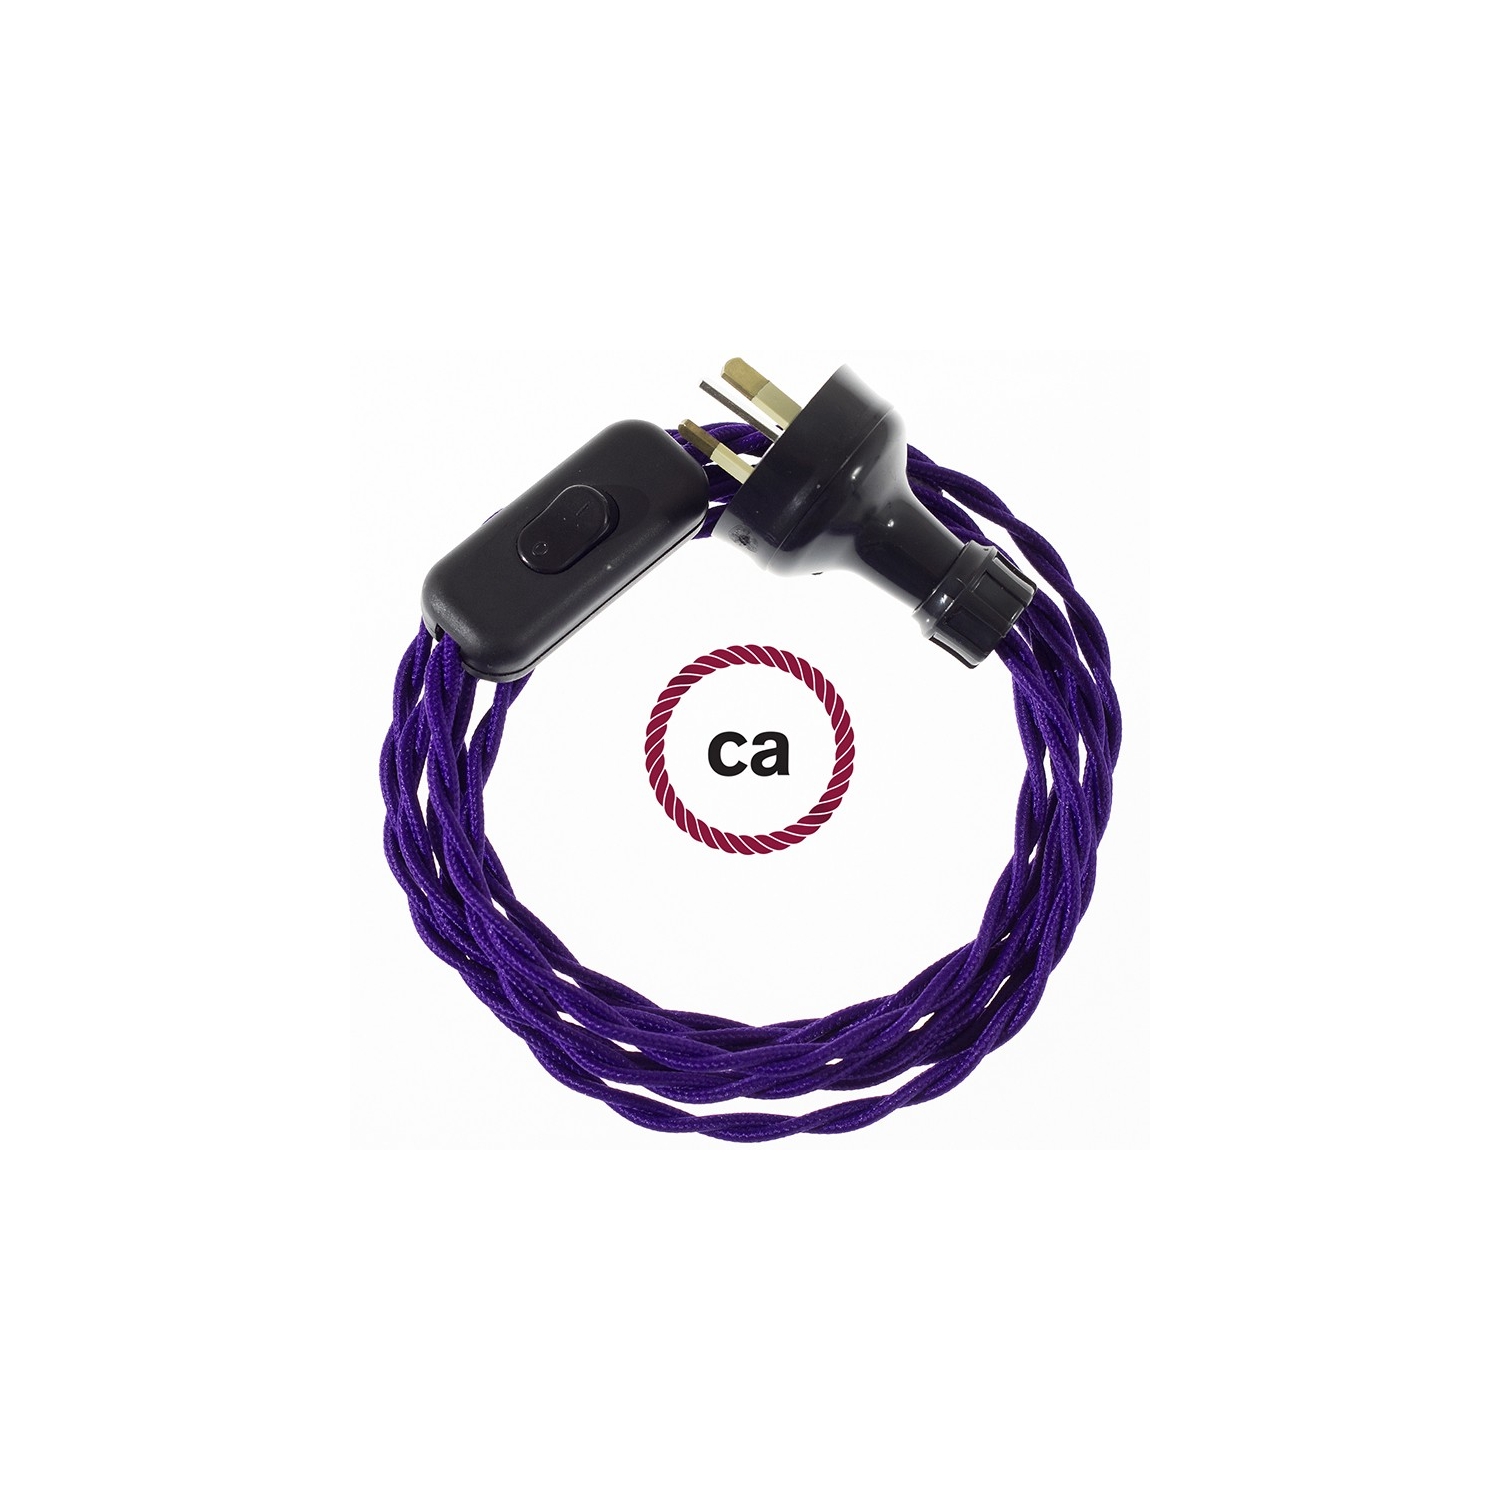 Wiring Violet Rayon textile cable TM14 - 1.80 mt